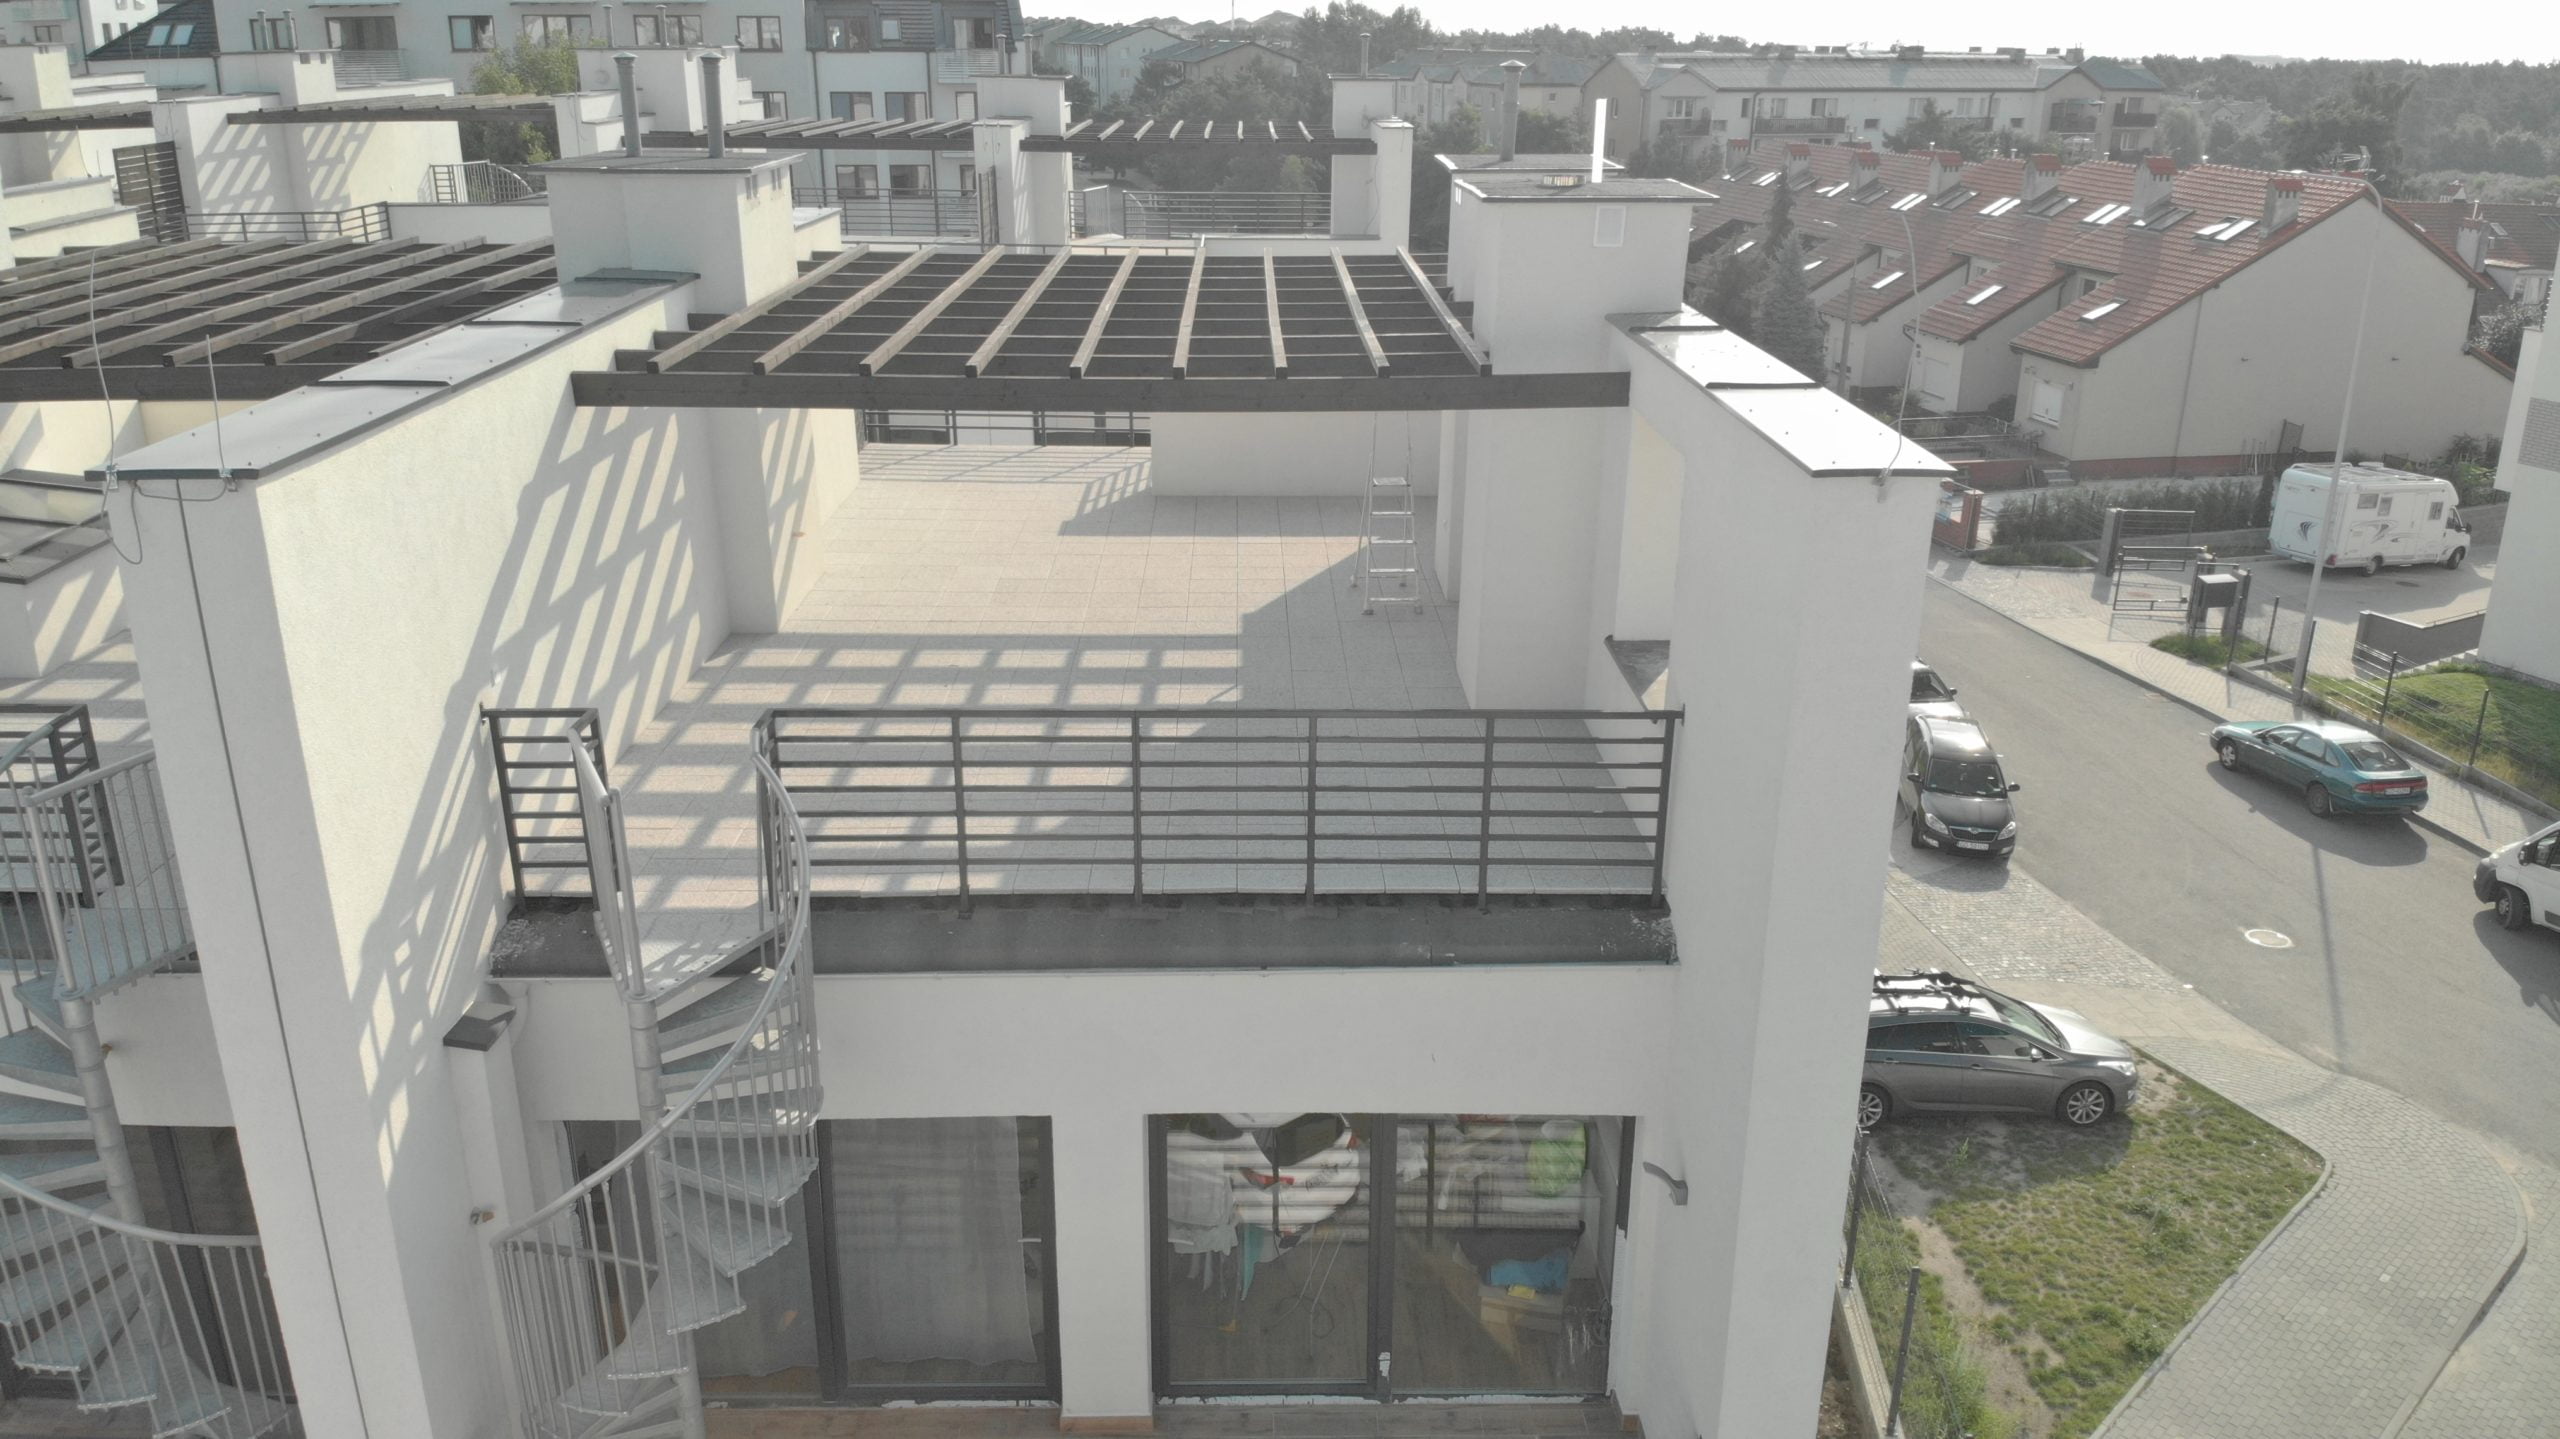 terrace with ceramic tiles on the roof of the building